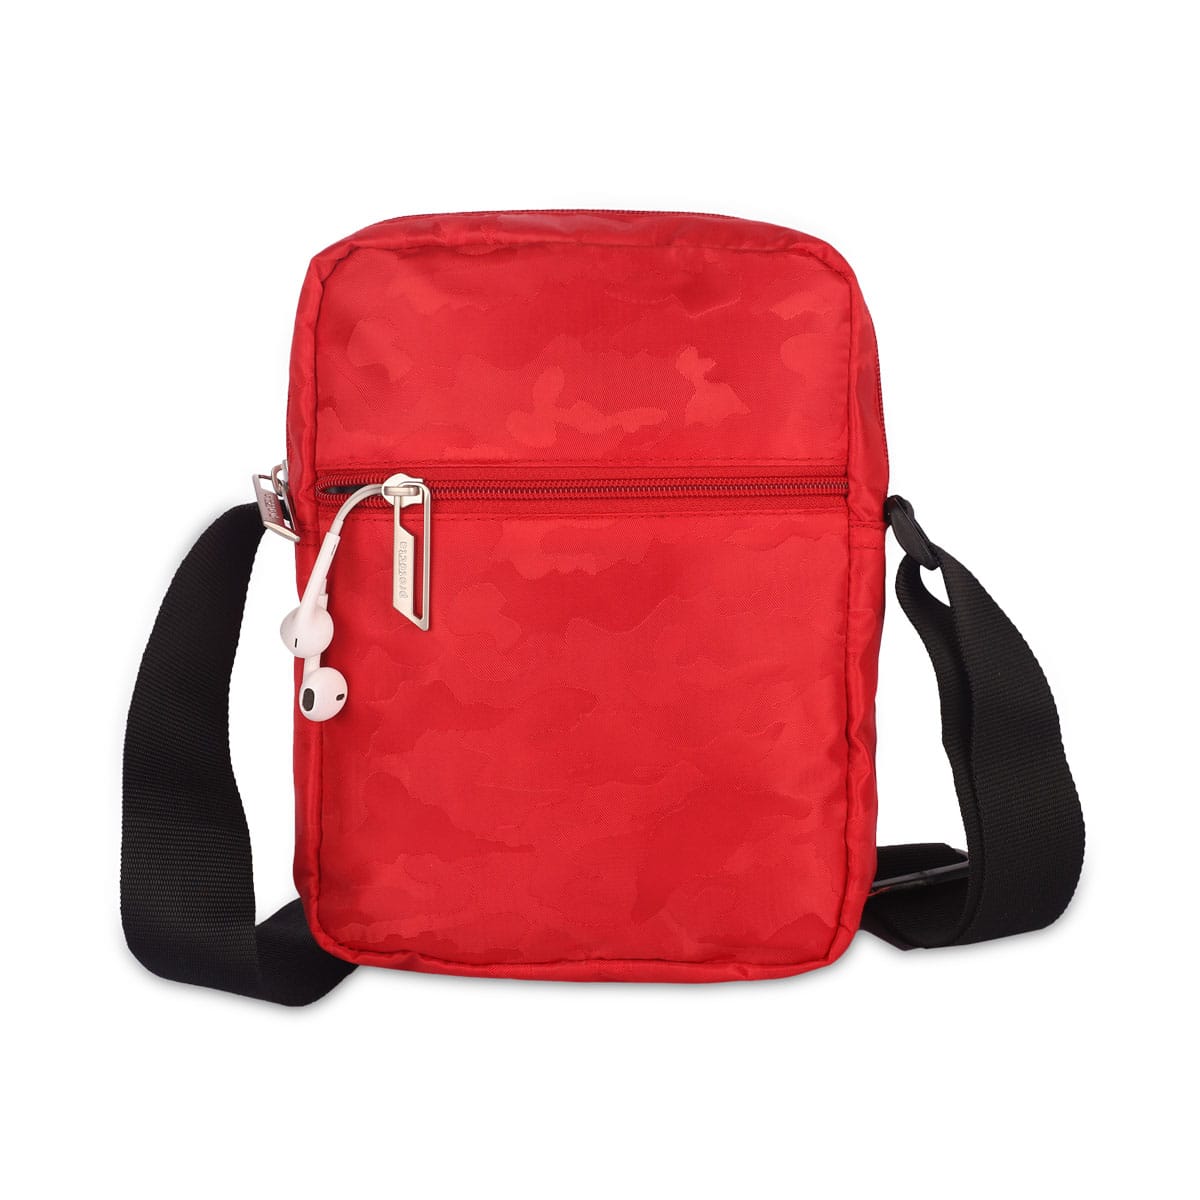 Red| Protecta Camo Unisex Sling Bag-1